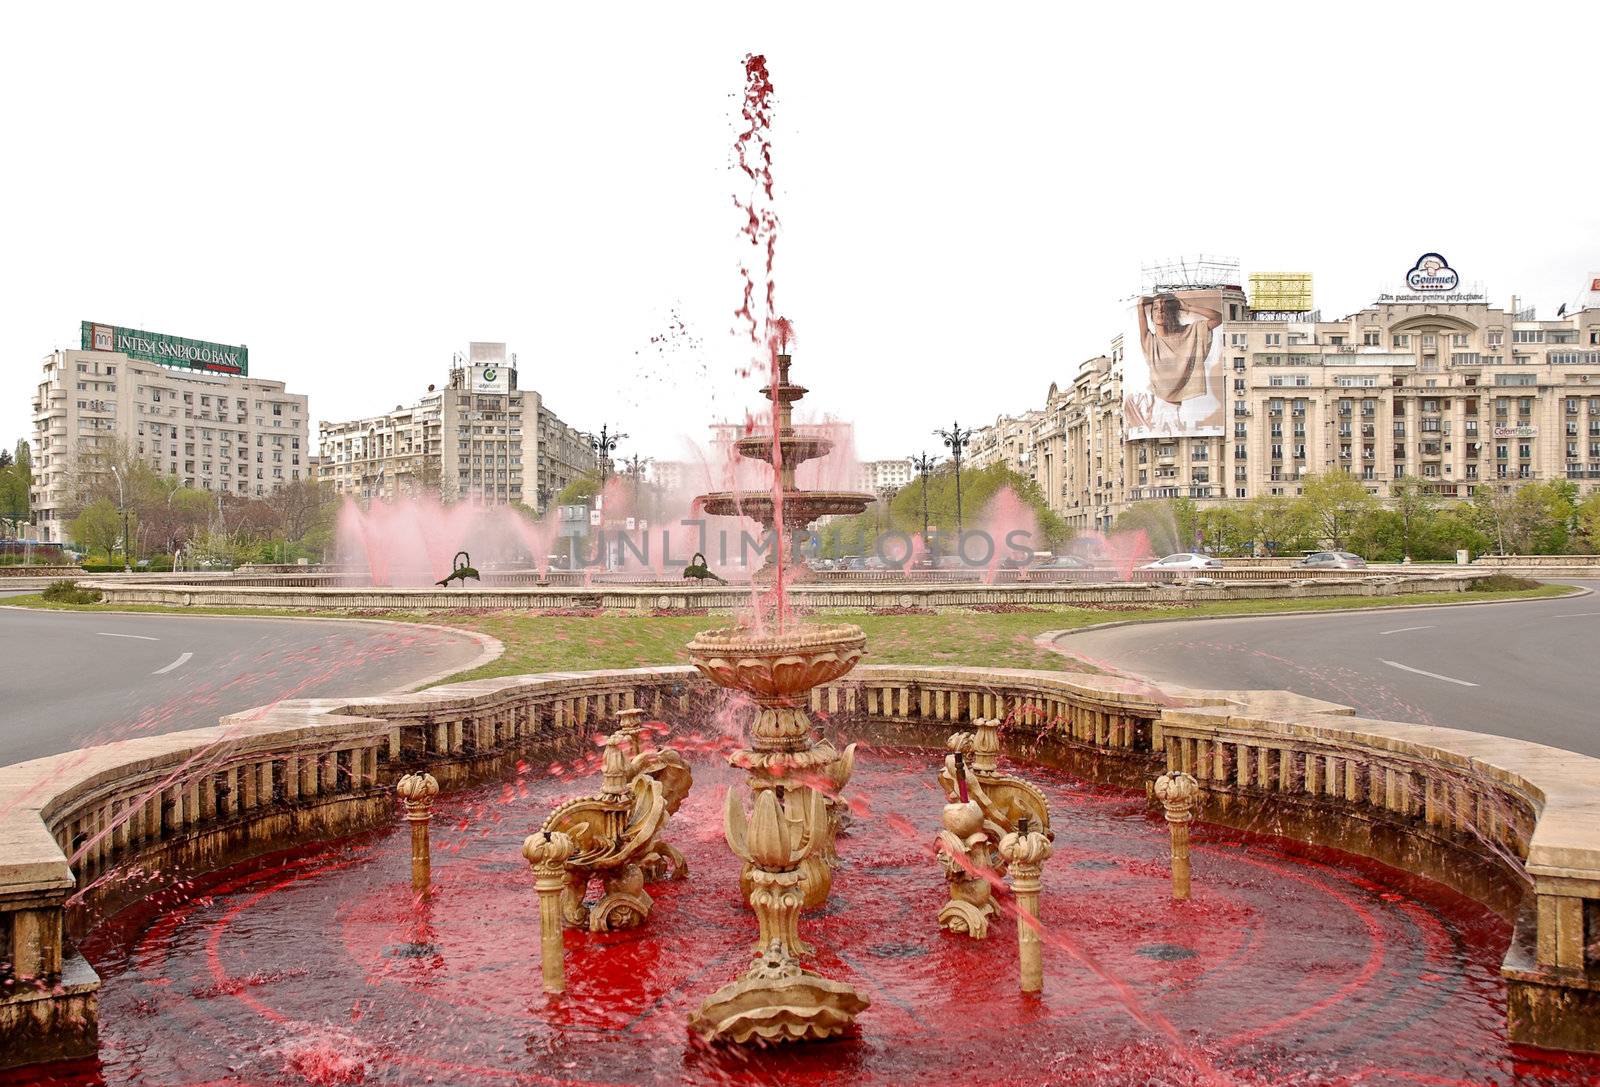 Fountains With Blood red Water to draw attention to blood donations and haemophilia on April 23, 2010 in Bucharest Romania
Photo taken on: April 19th, 2010